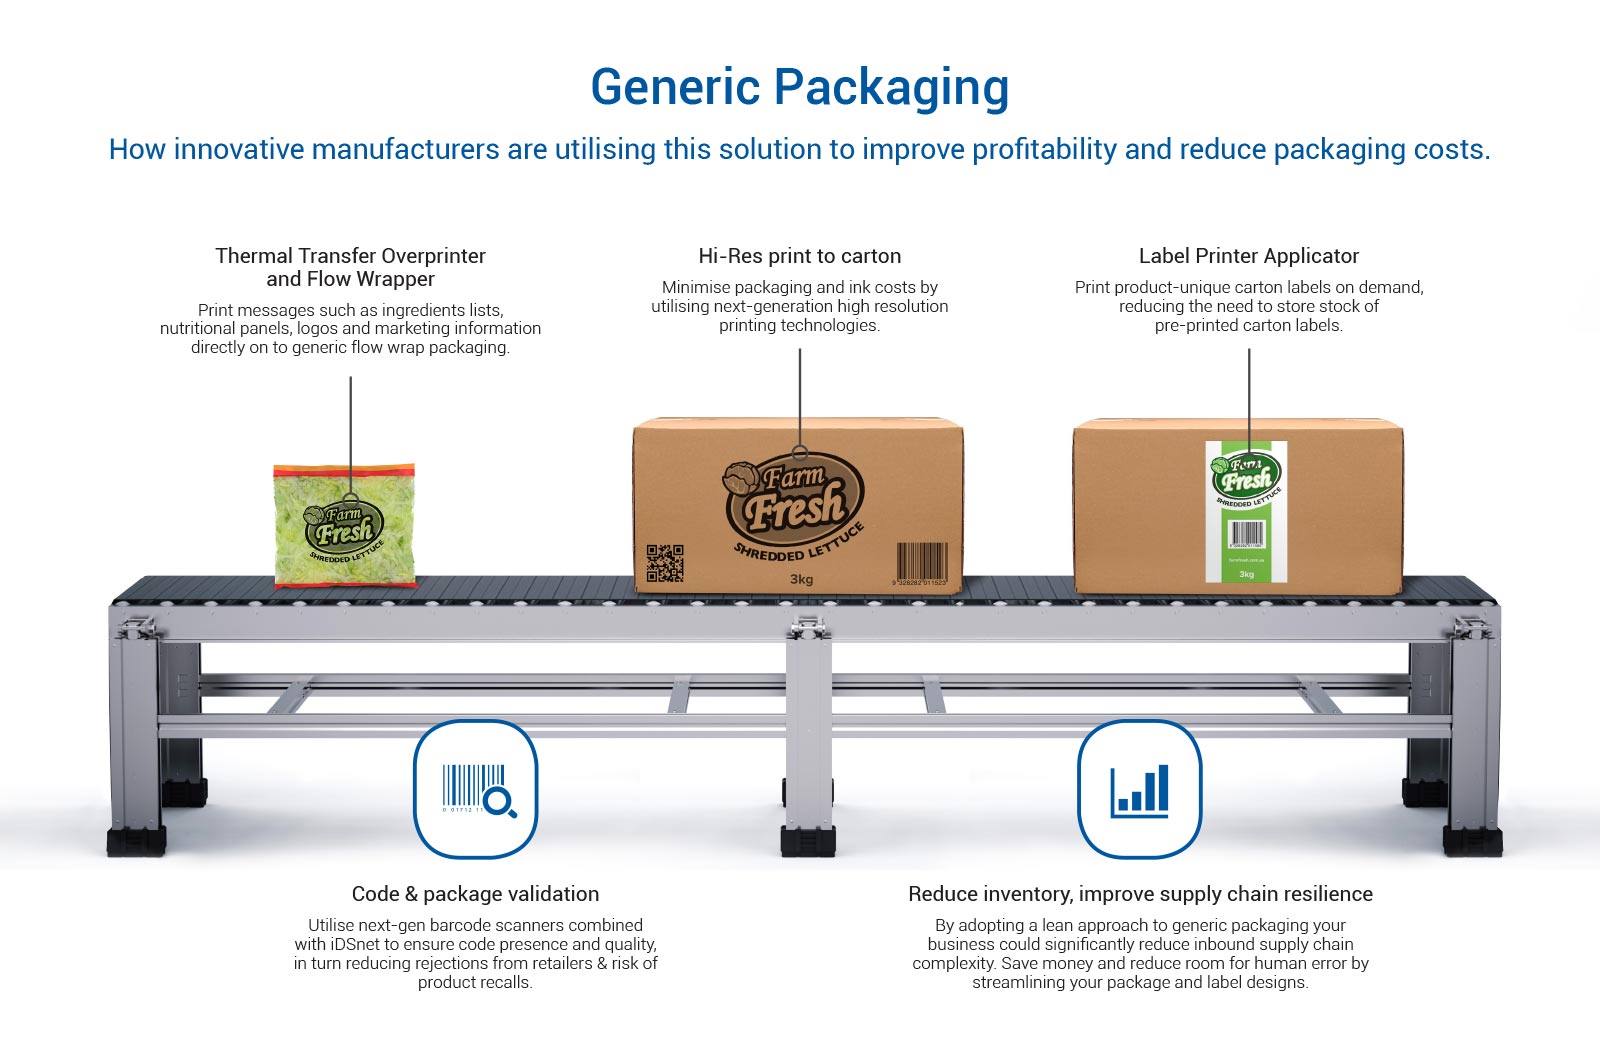 generic packaging to improve profitability and reduce packaging costs